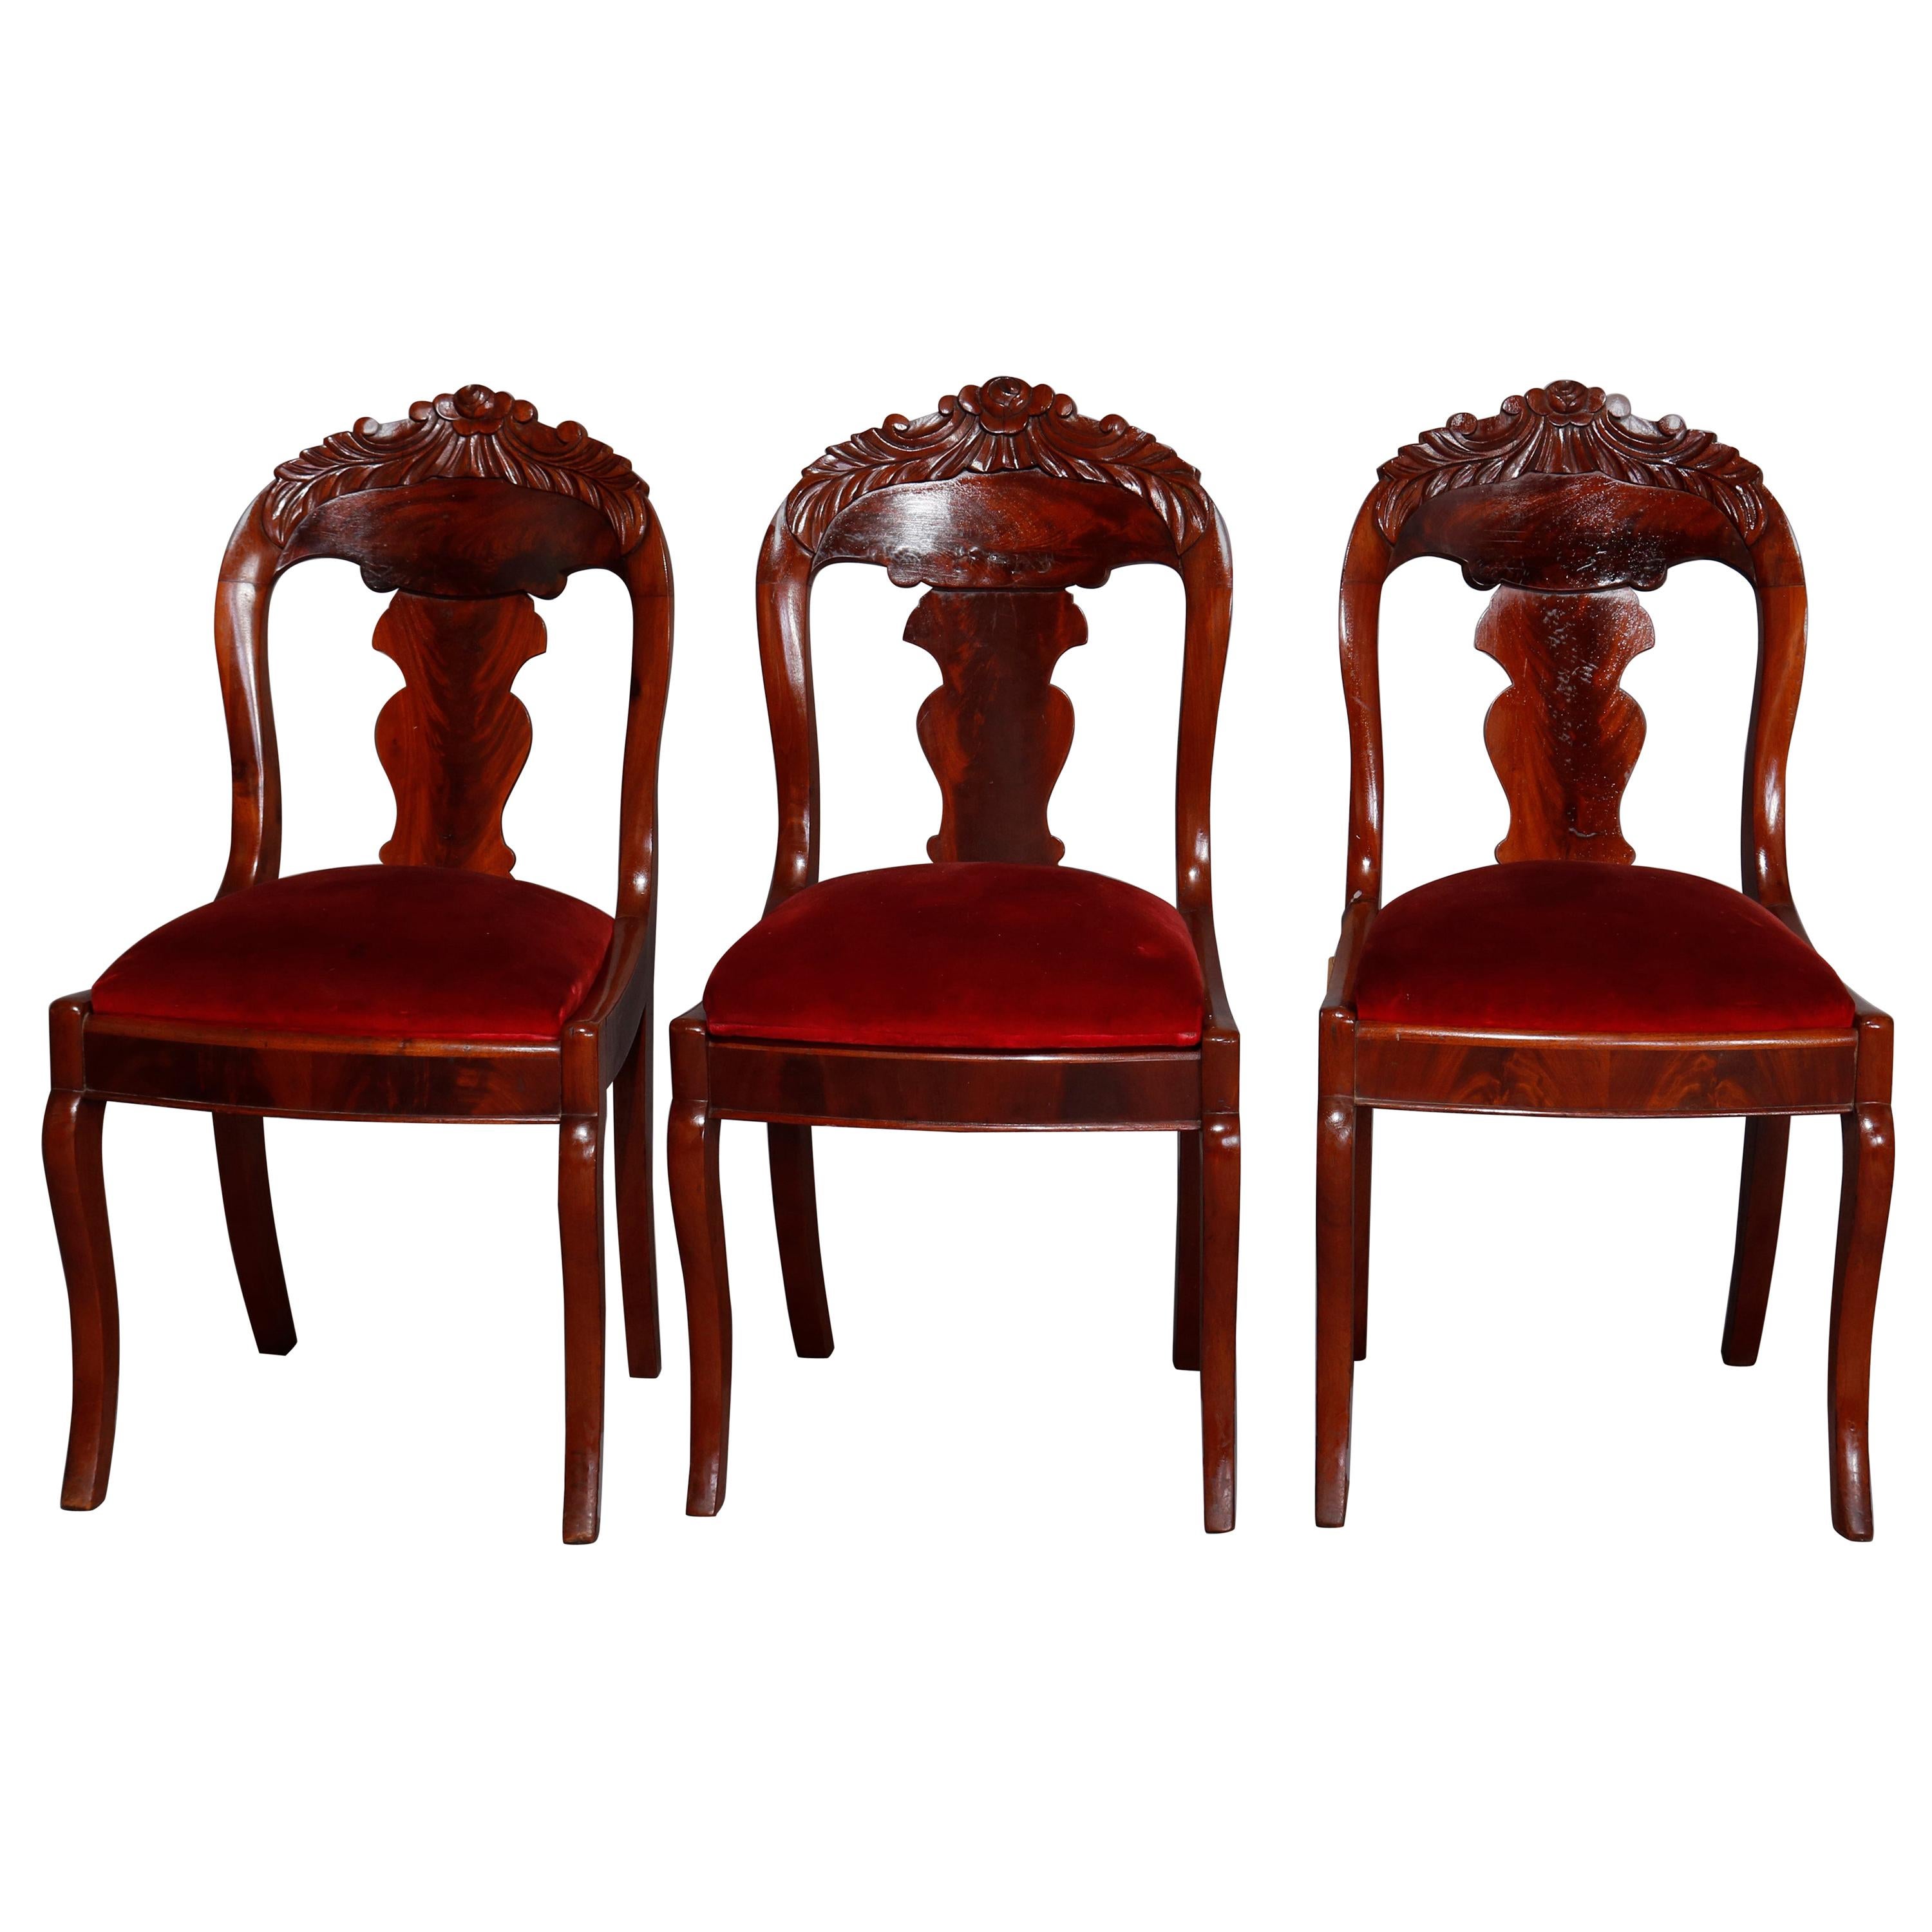 Six Antique American Empire Carved Flame Mahogany Gondola Dining Chairs